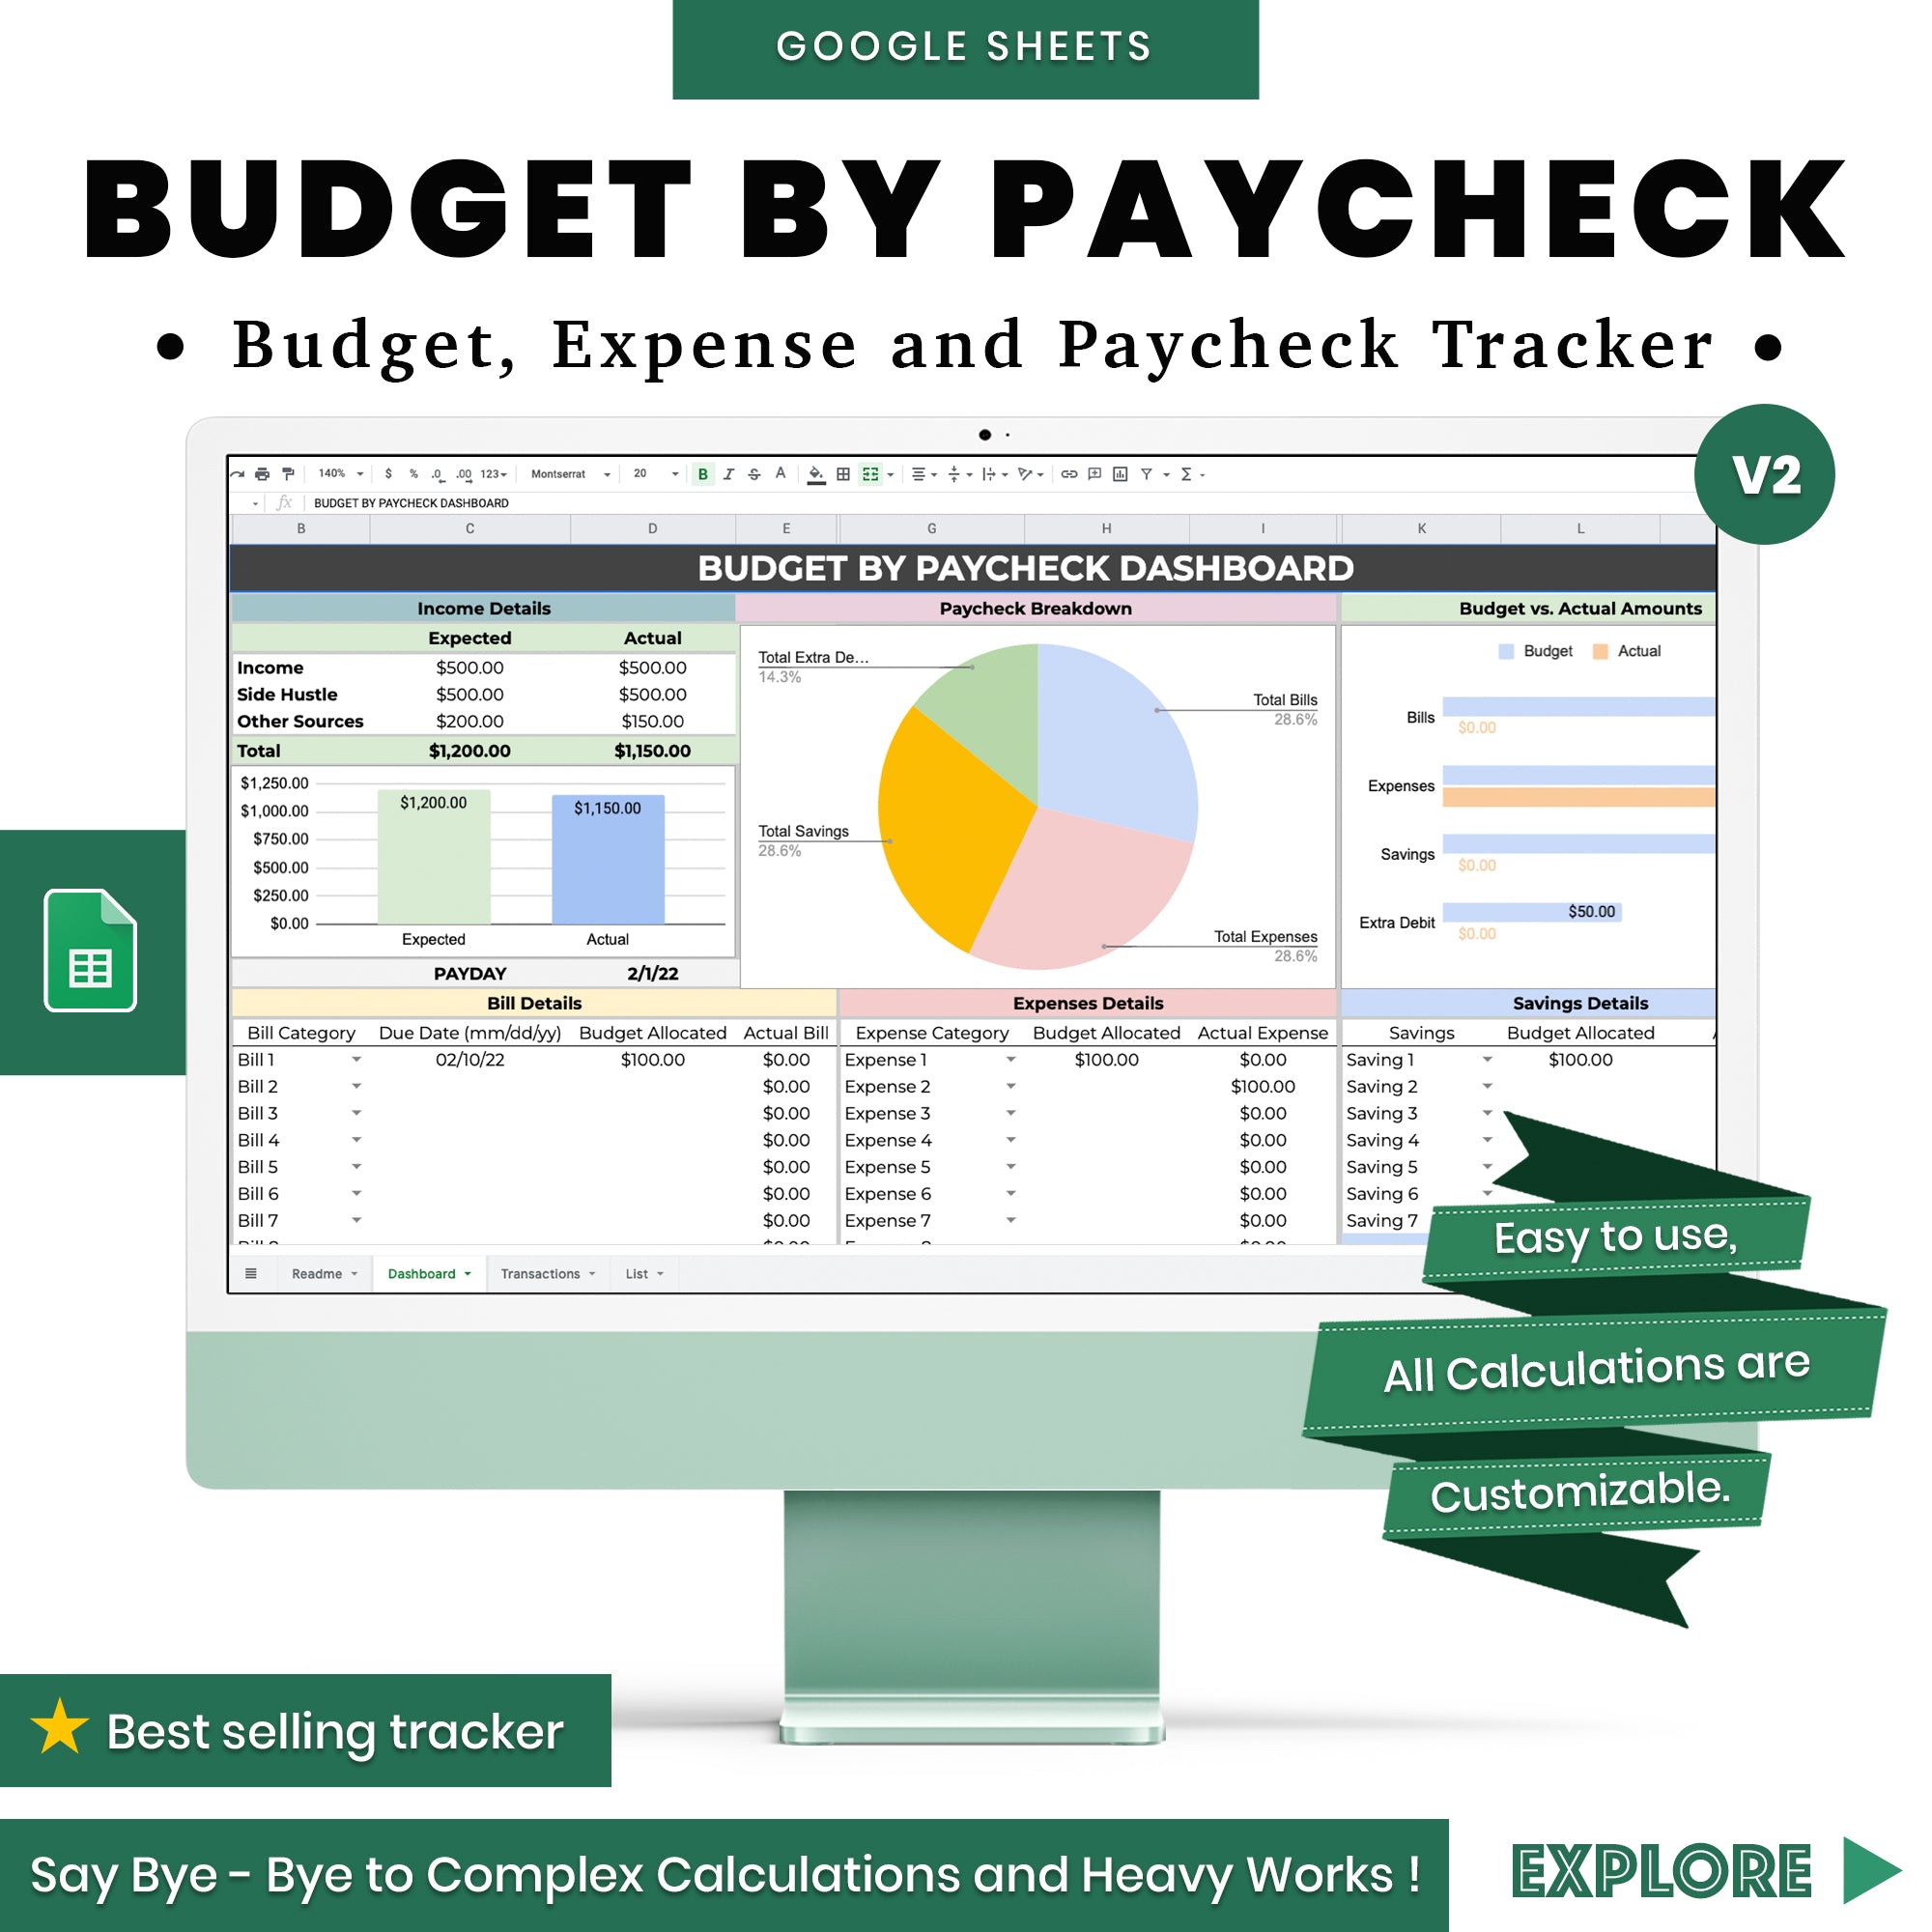 BUDGET BY PAYCHECK SPREADSHEET - Easy to use spreadsheet template.